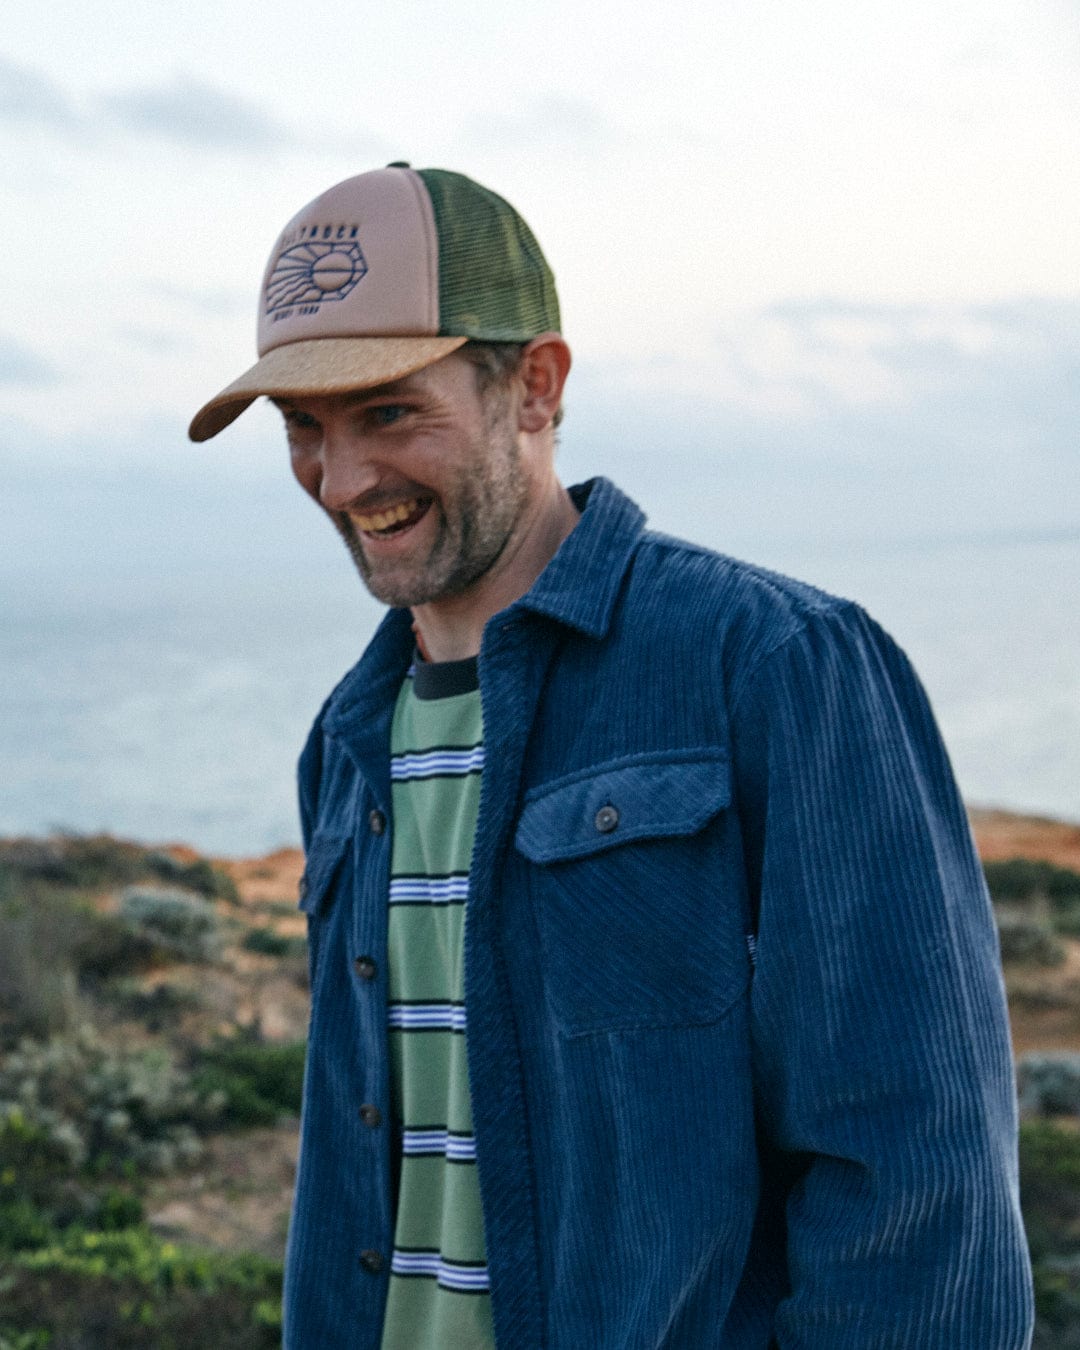 A man wearing a Saltrock "Ace" mens long sleeve shirt in blue, hat, and jeans on a hill overlooking the ocean.